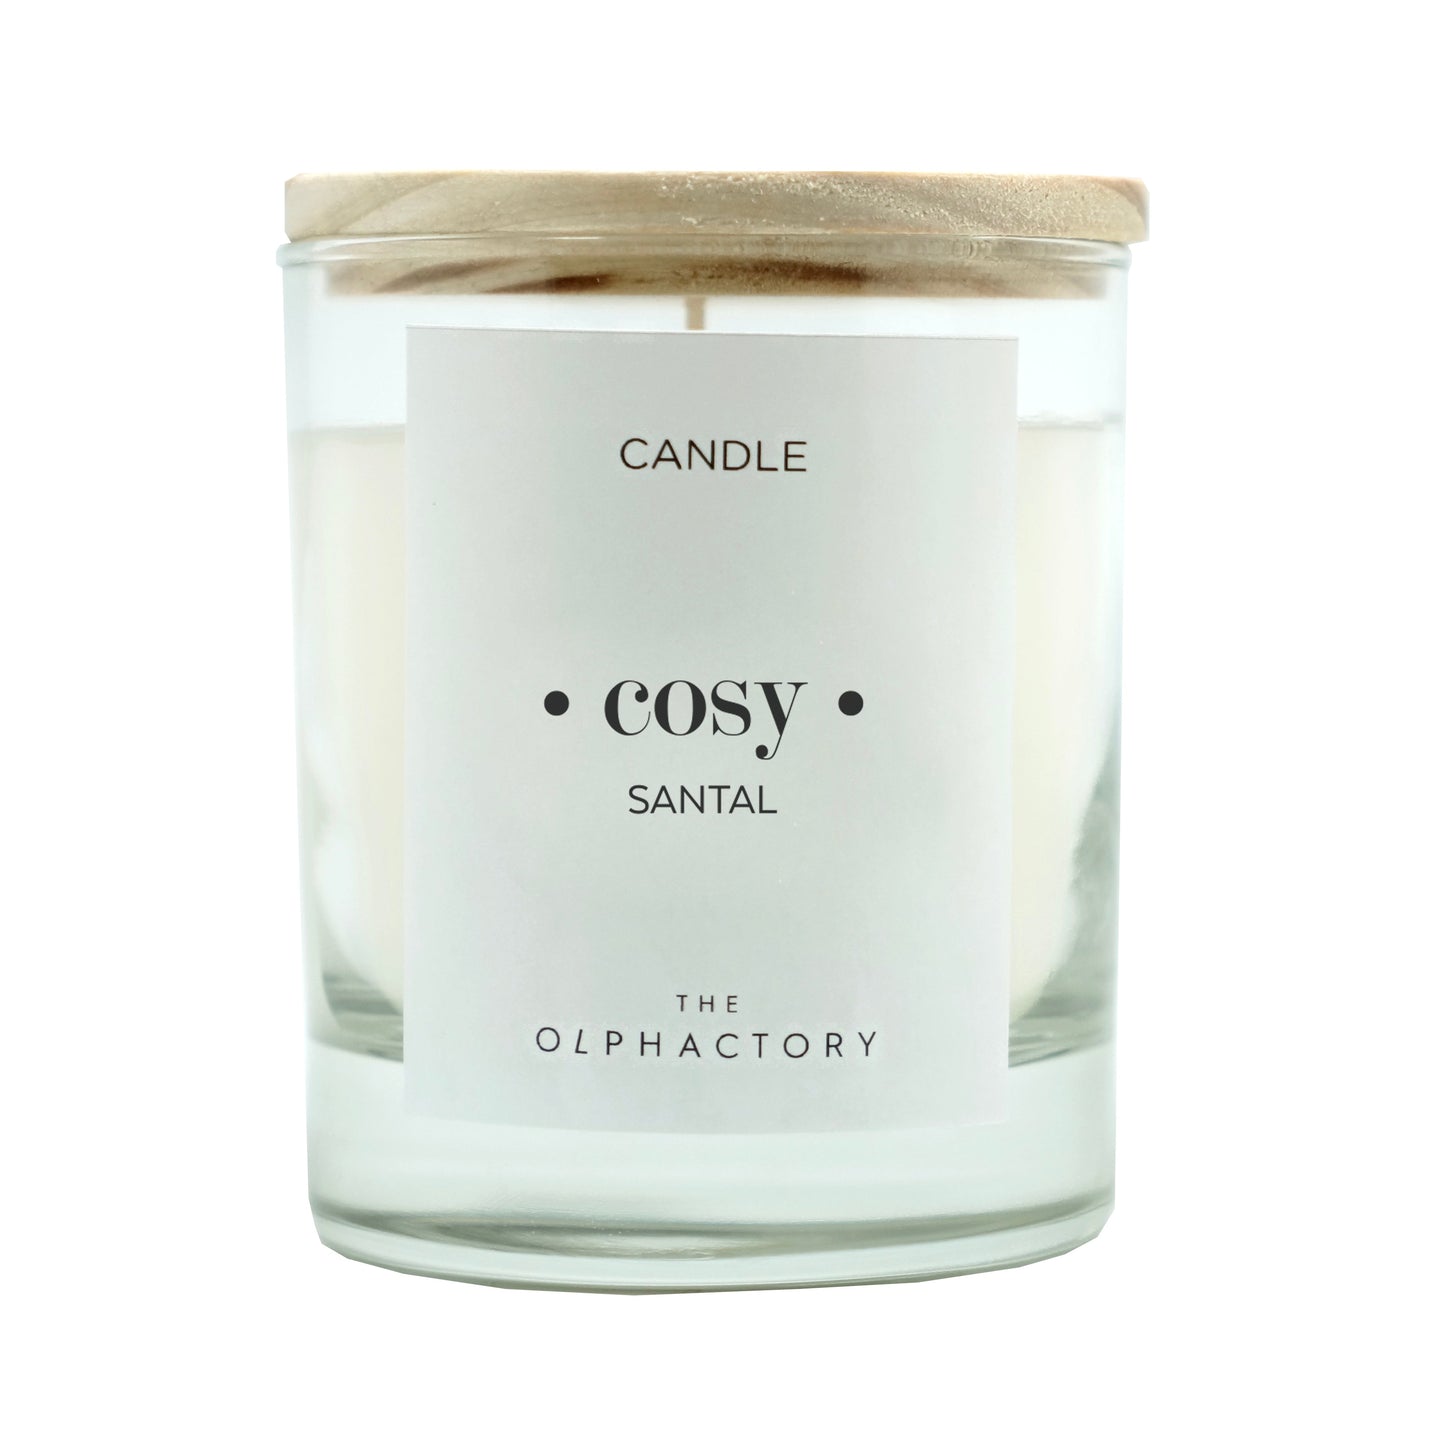 The Olphactory Candle: Santal #Cosy-Breda's Gift Shop